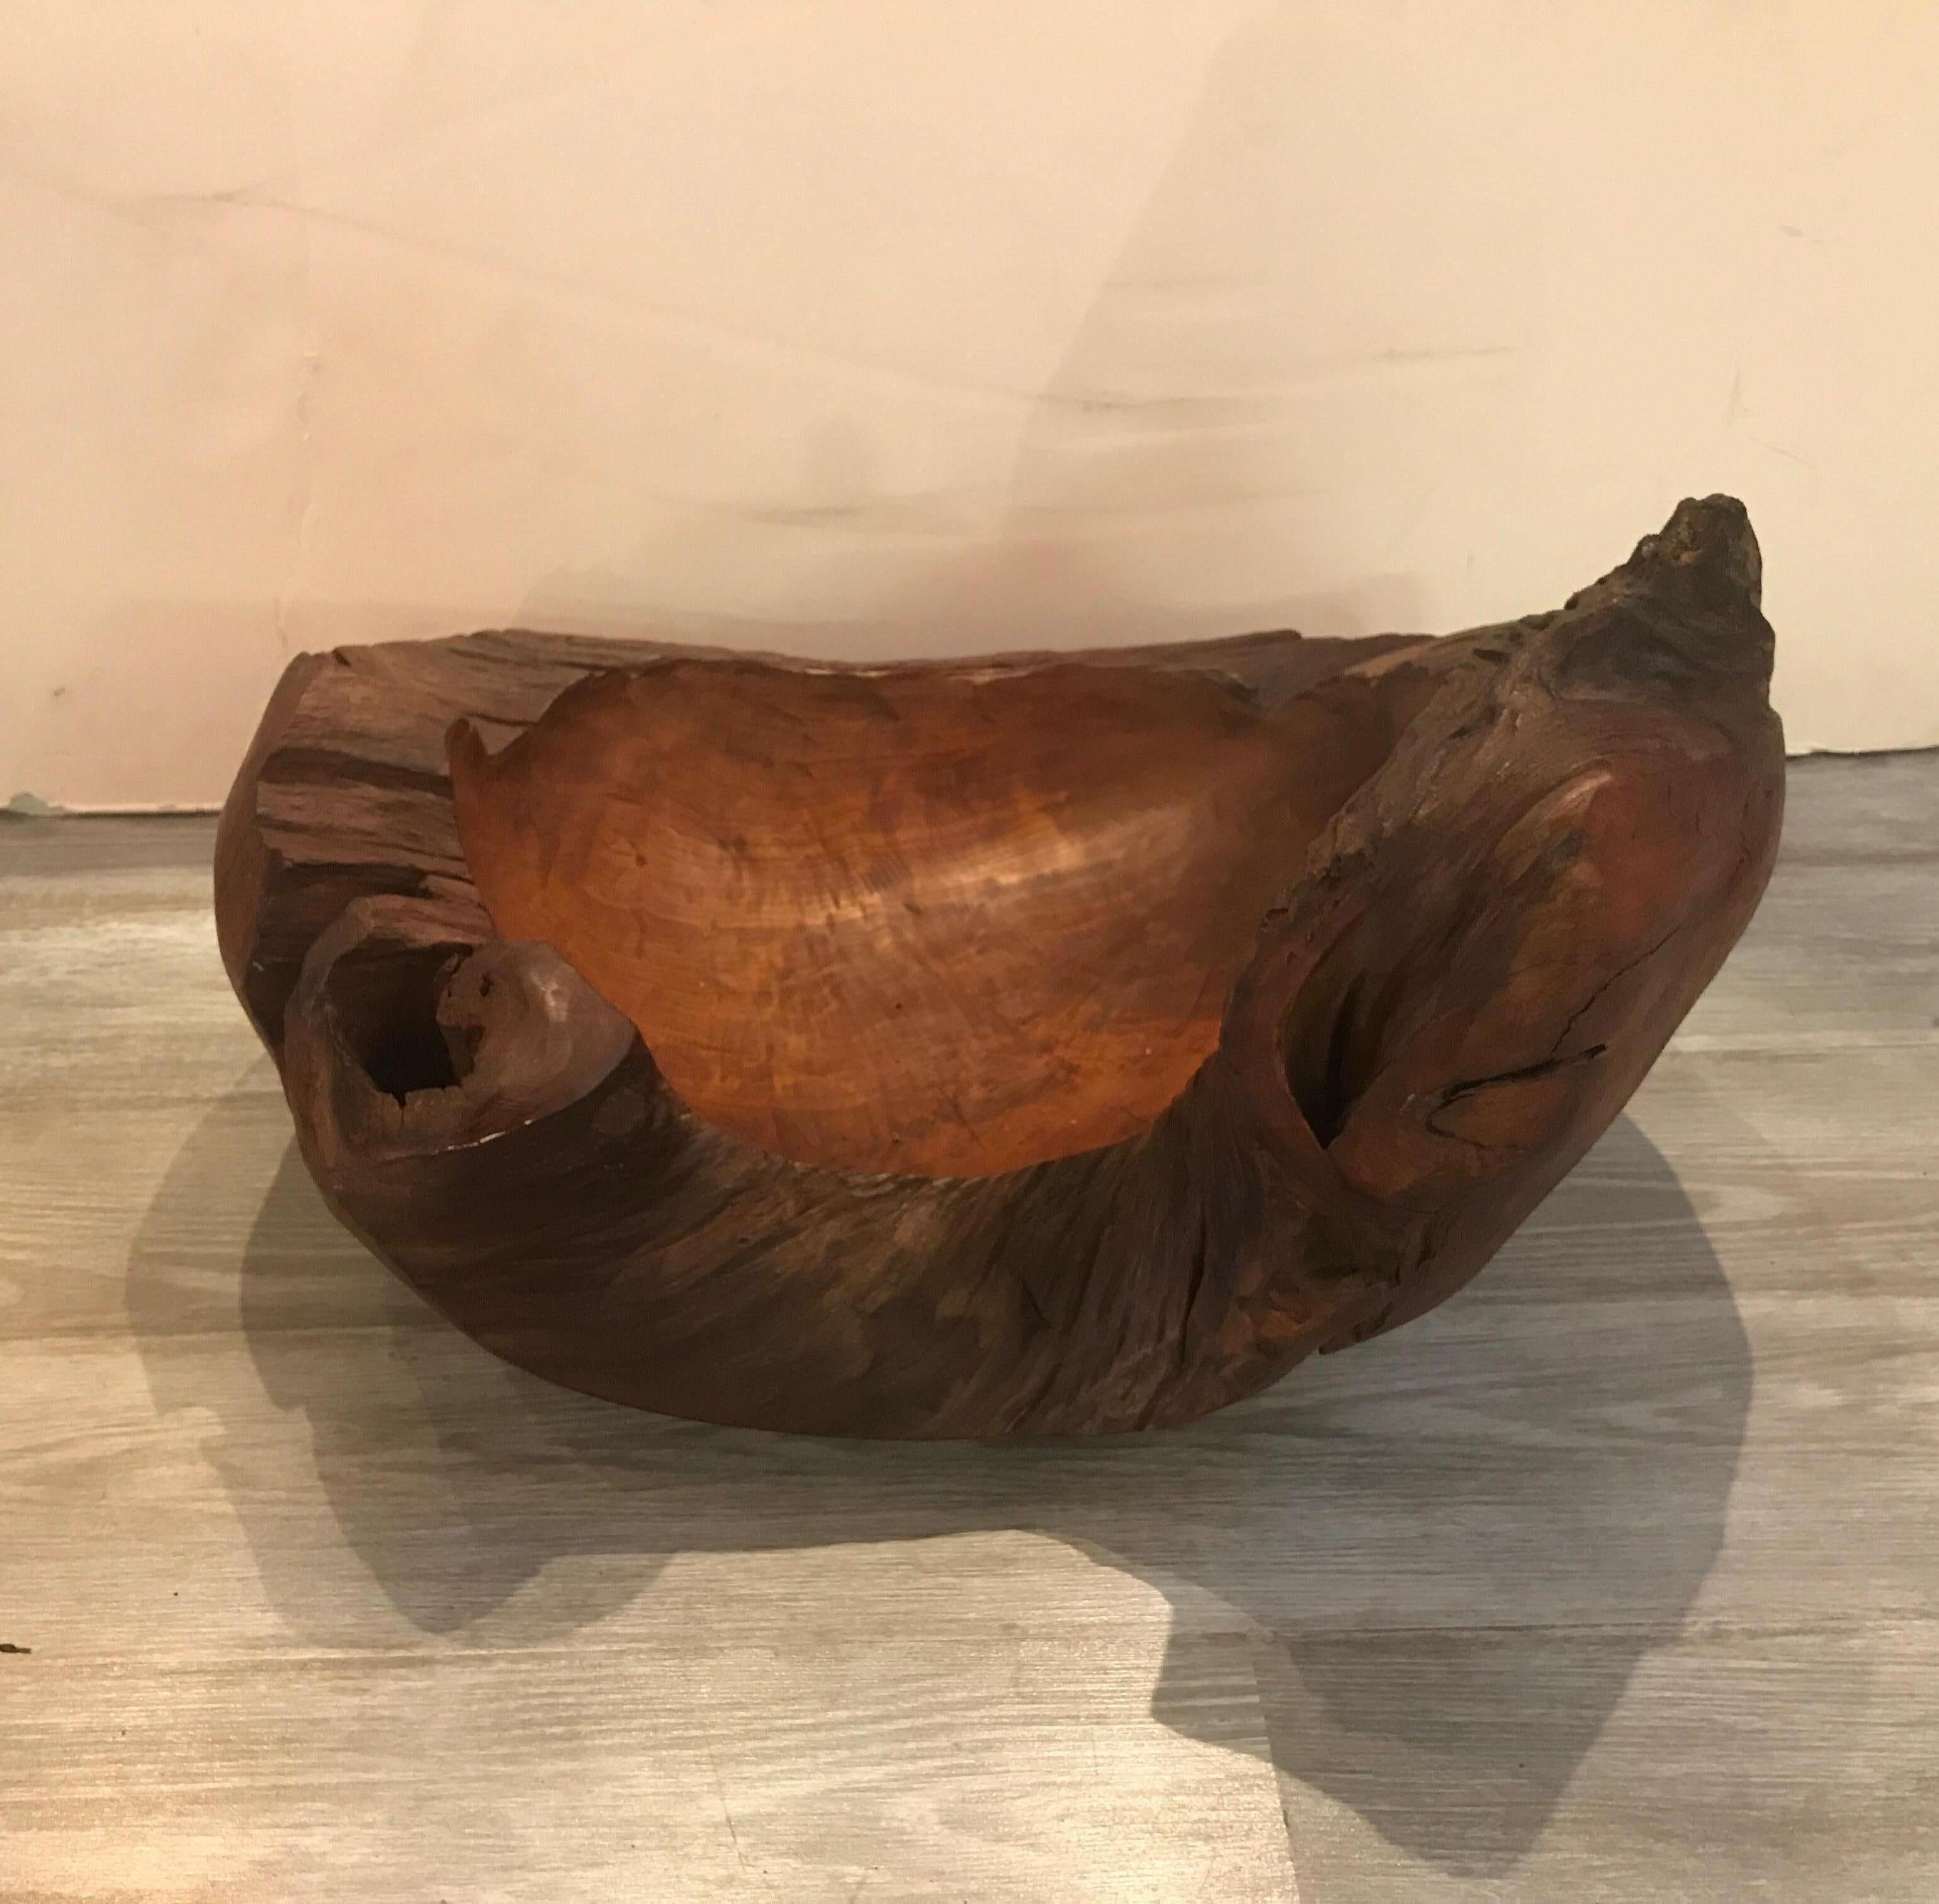 Unusual and highly figurative hand-carved artisan bowl, mid-20th century, American. This one of a kind hand carved bowl is made from a single large piece of wood. Very earthy and organic.